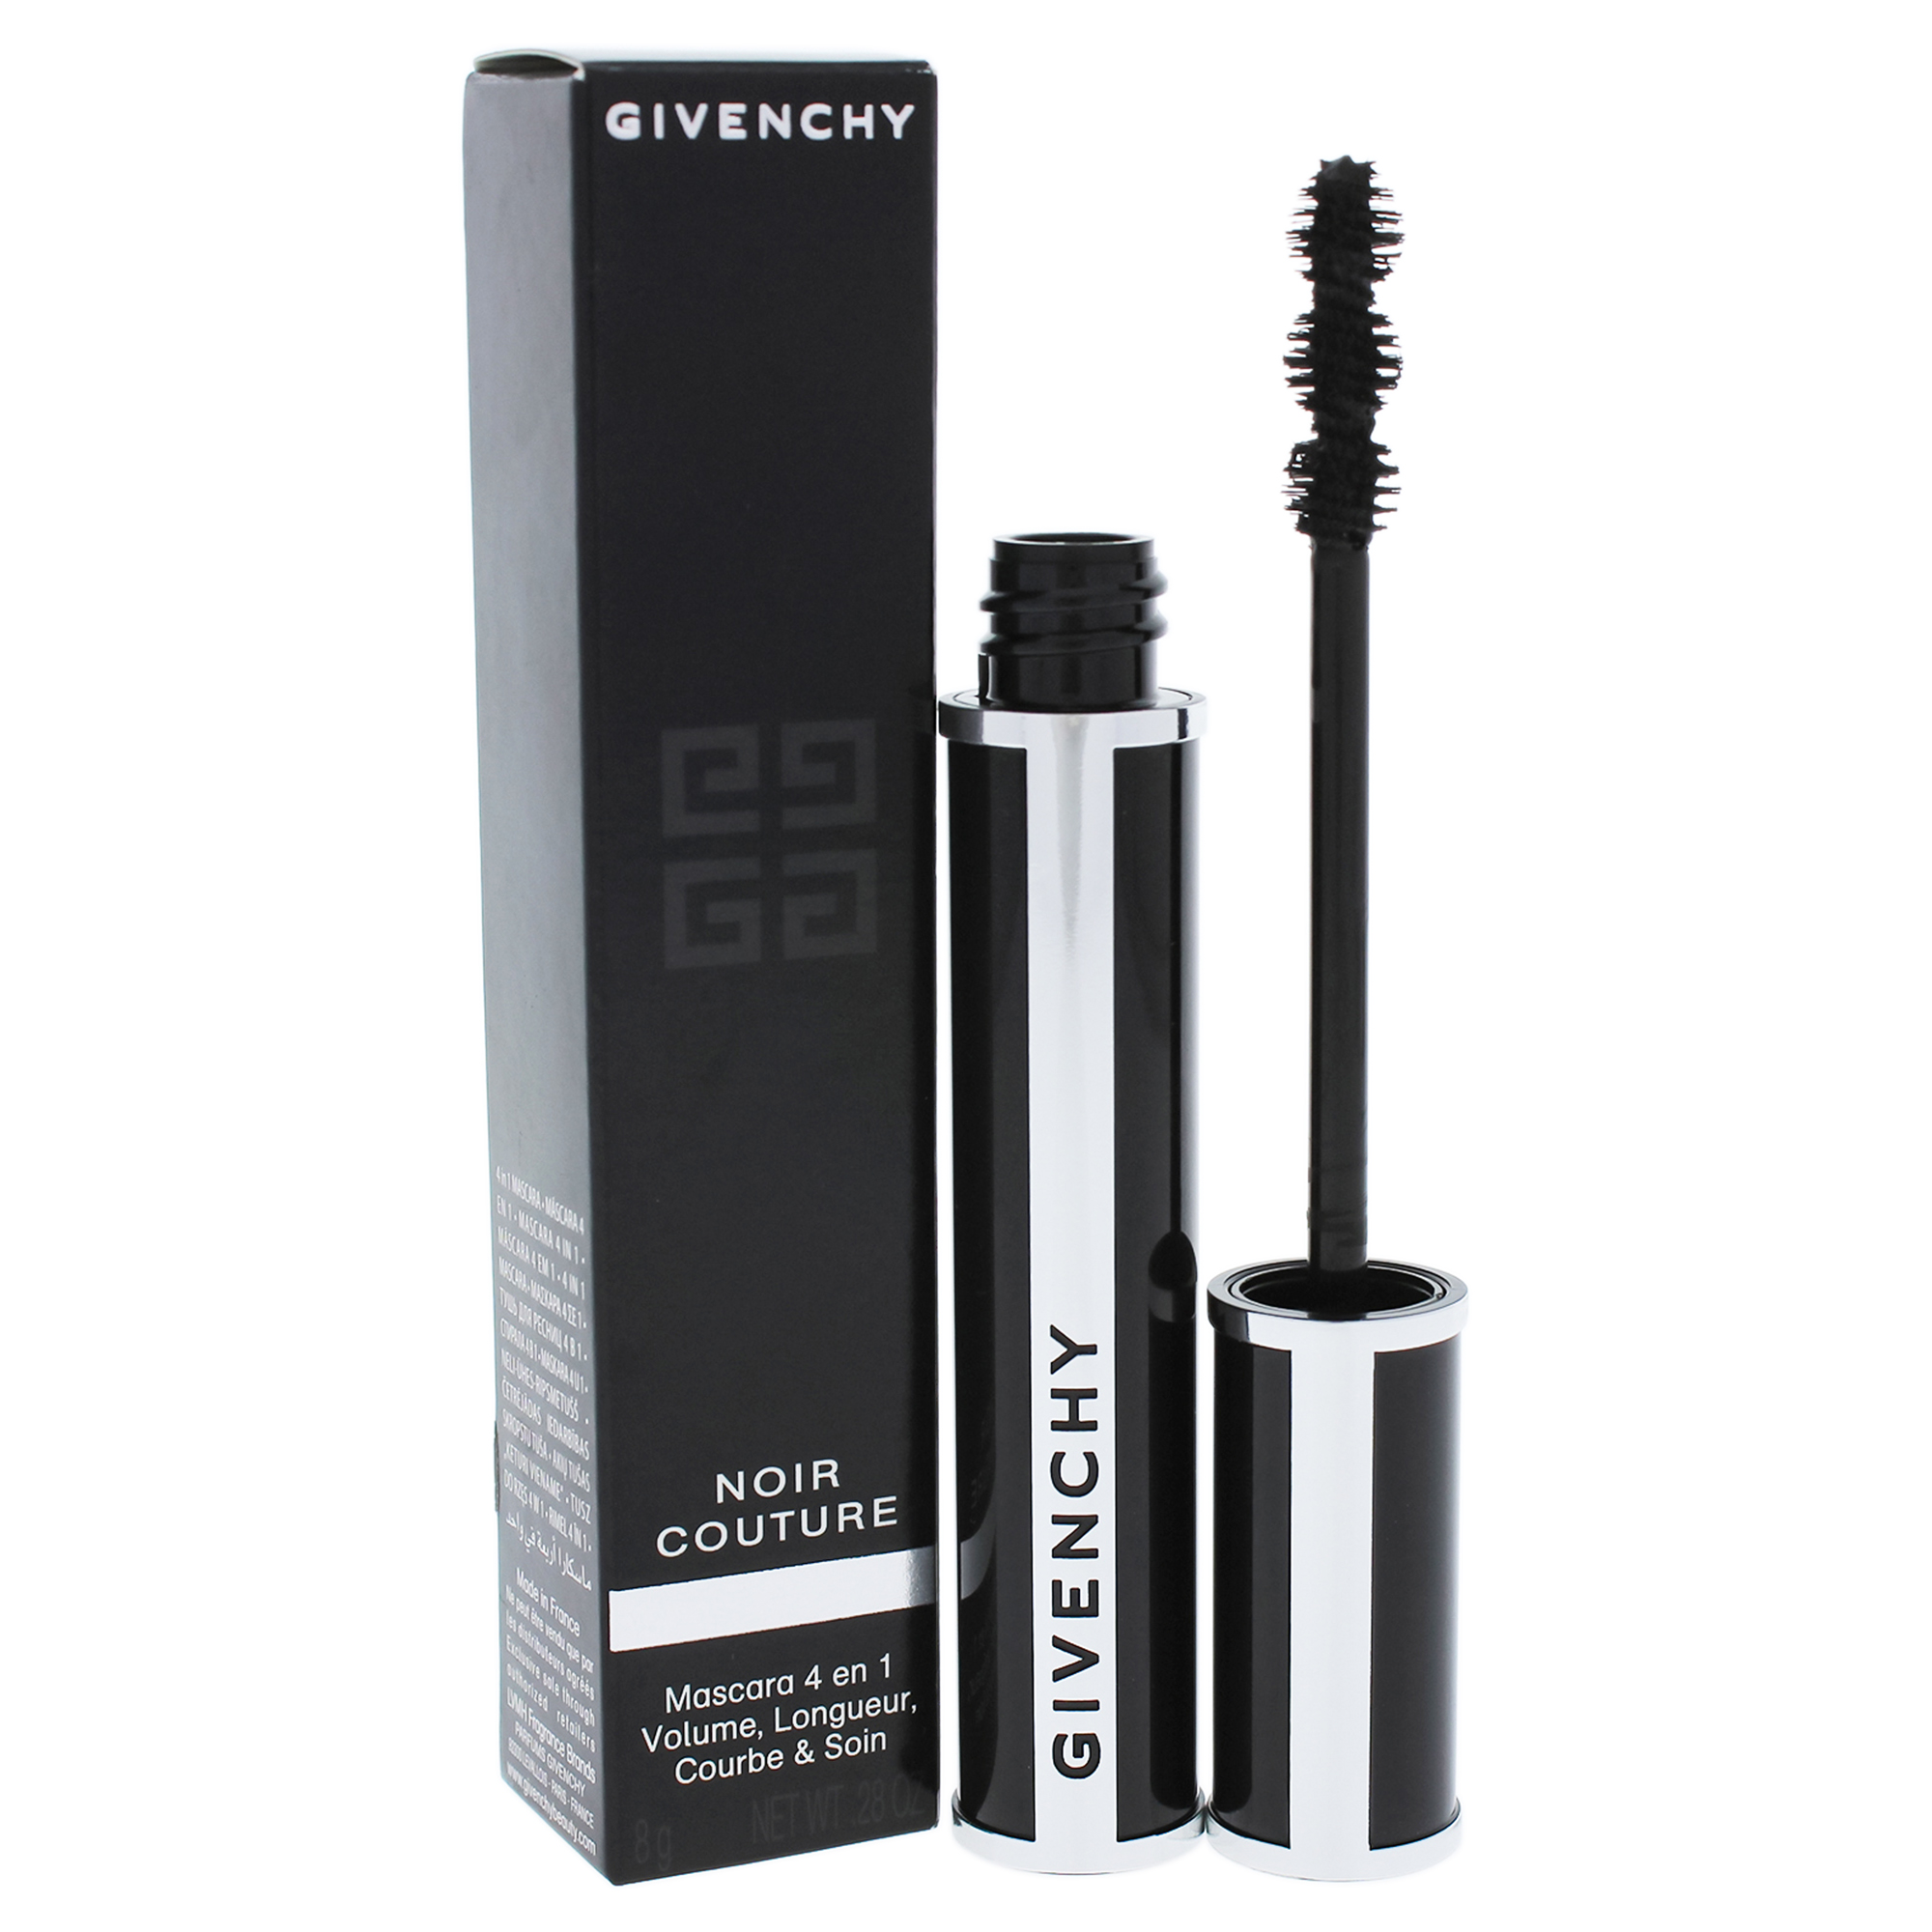 Noir Couture 4 In 1 Mascara - 1 Black Satin by Givenchy for Women - 0.28 oz Mascara - image 1 of 2